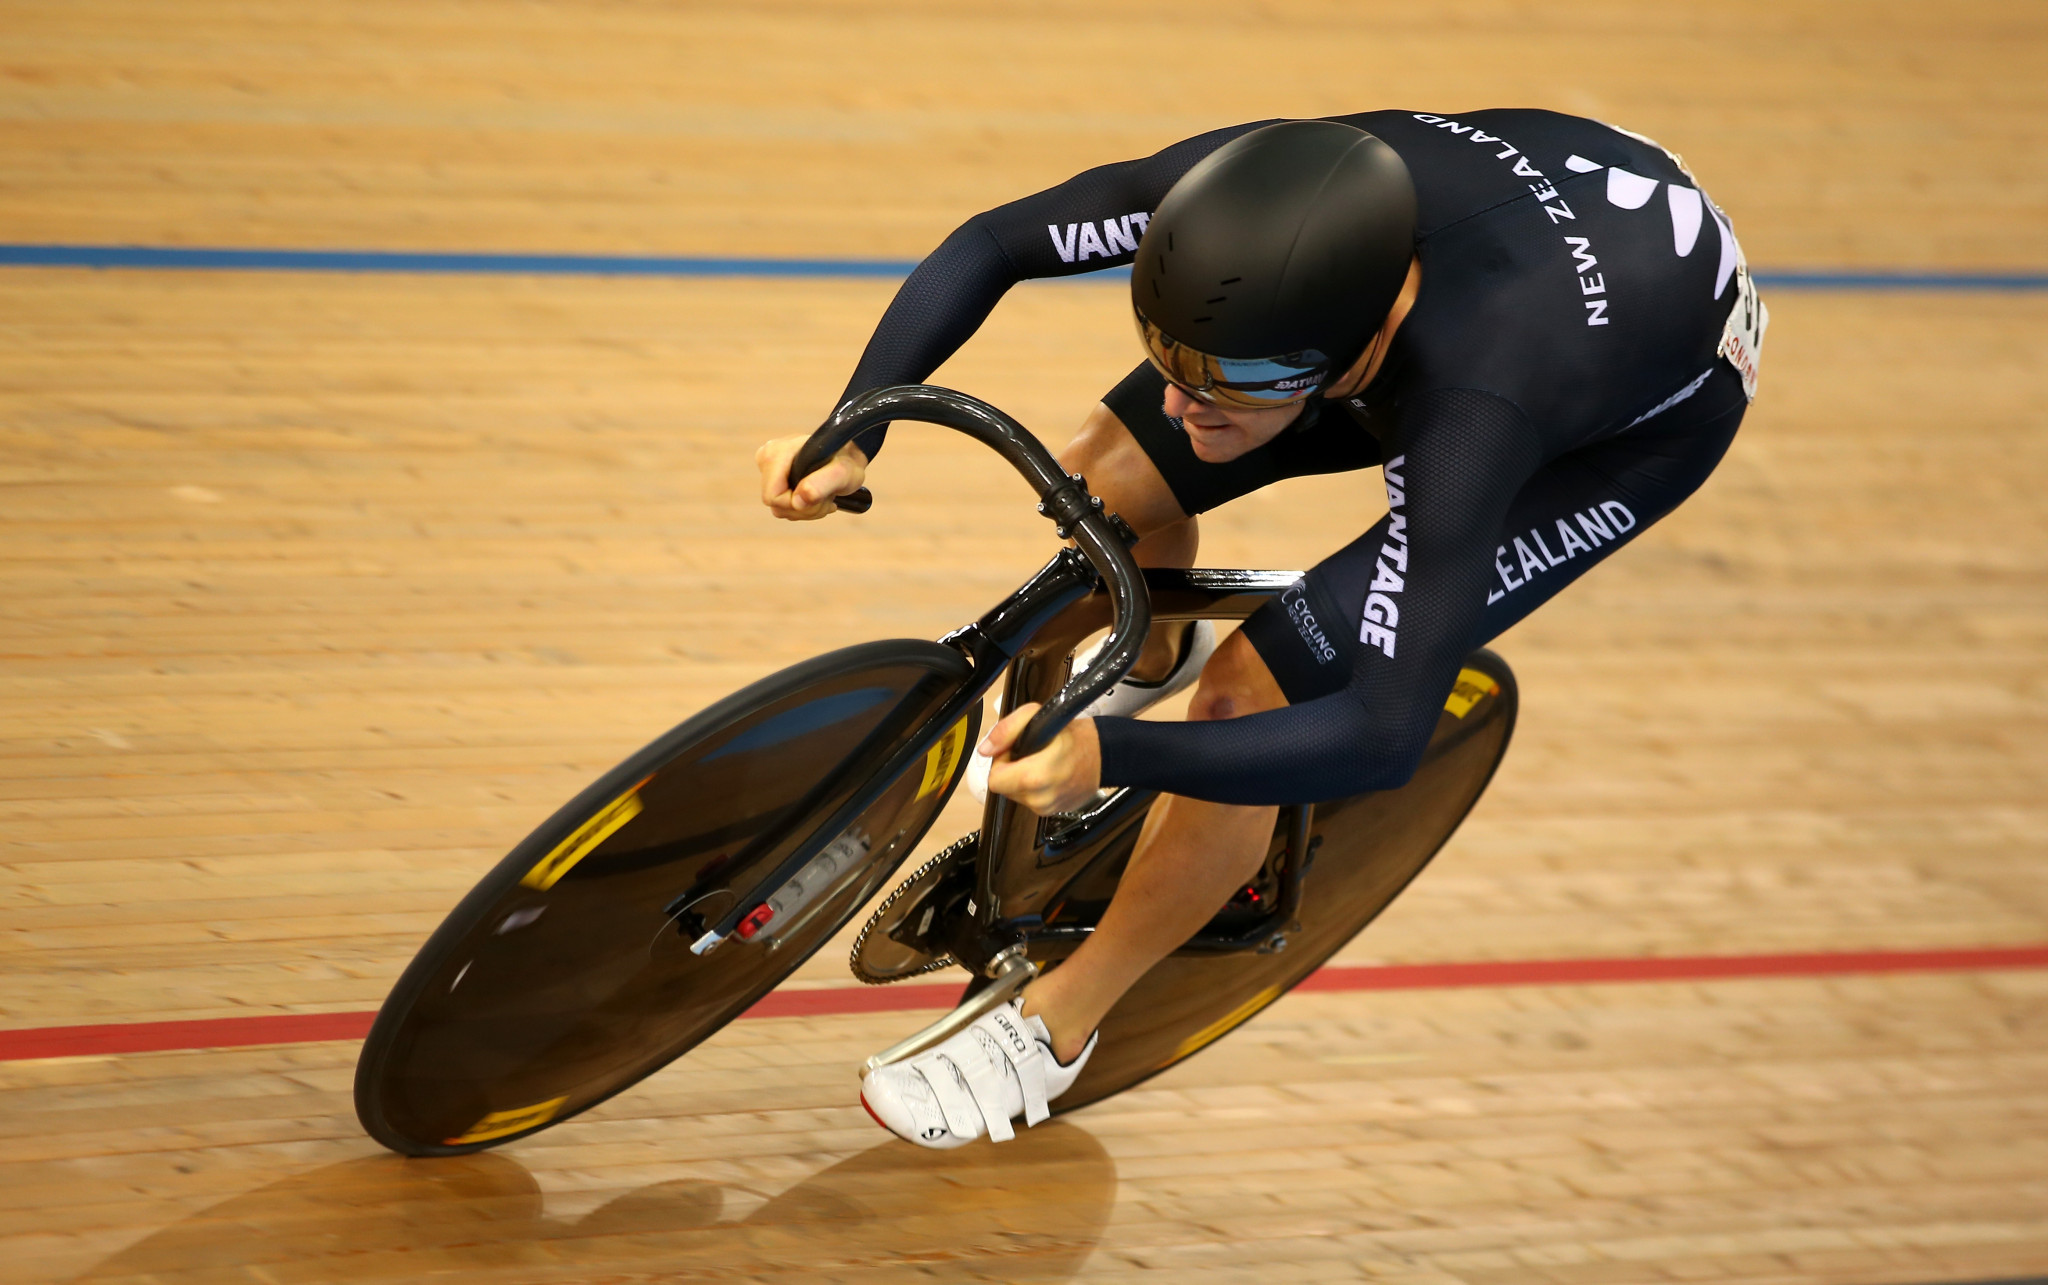 Aaron Gate was one of four New Zealand gold medallists in the senior categories ©Getty Images